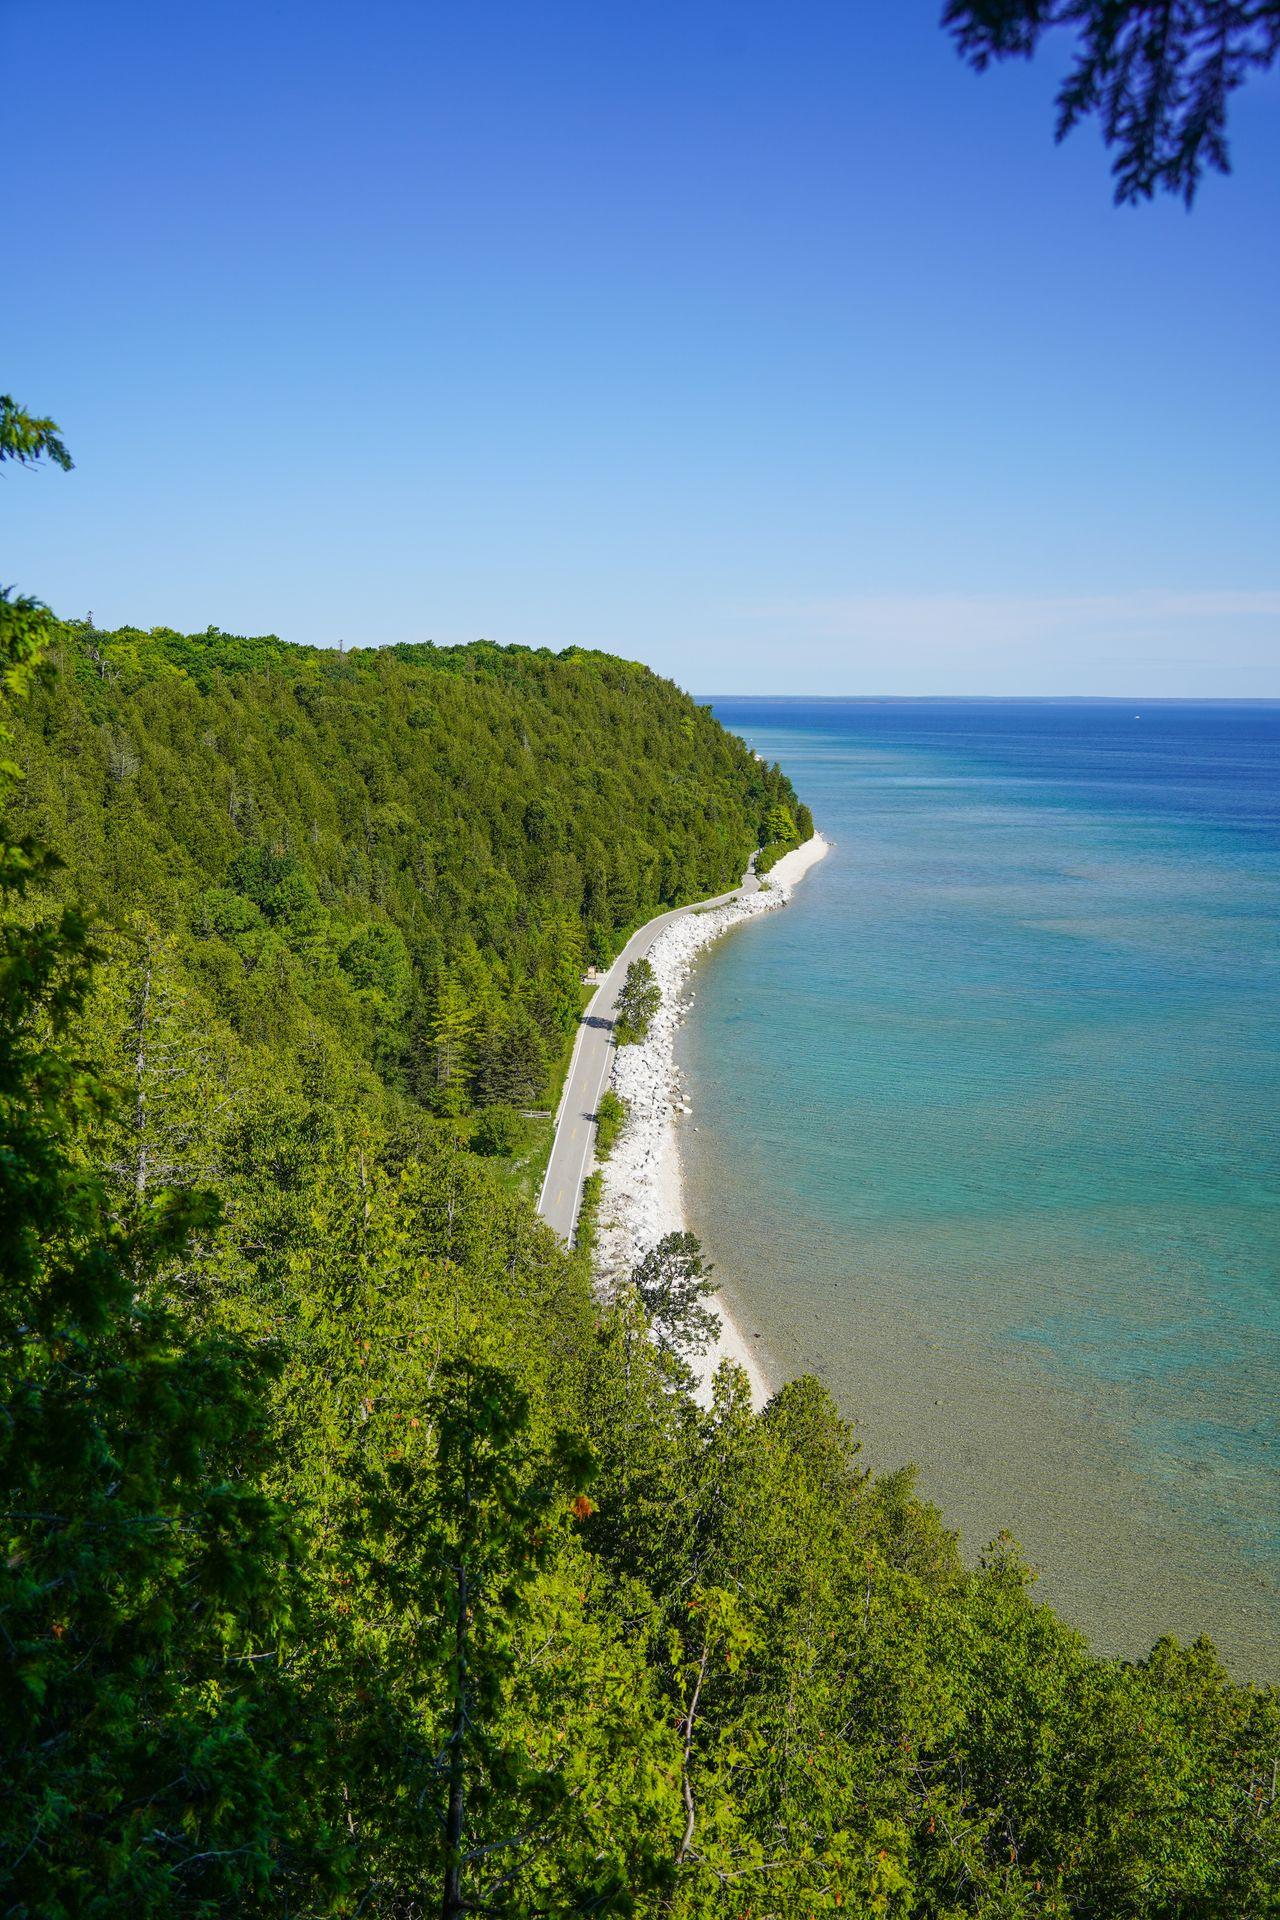 Looking at the shoreline of the island and the loop road from the Tranquil Bluff Trail on Mackinac Island.